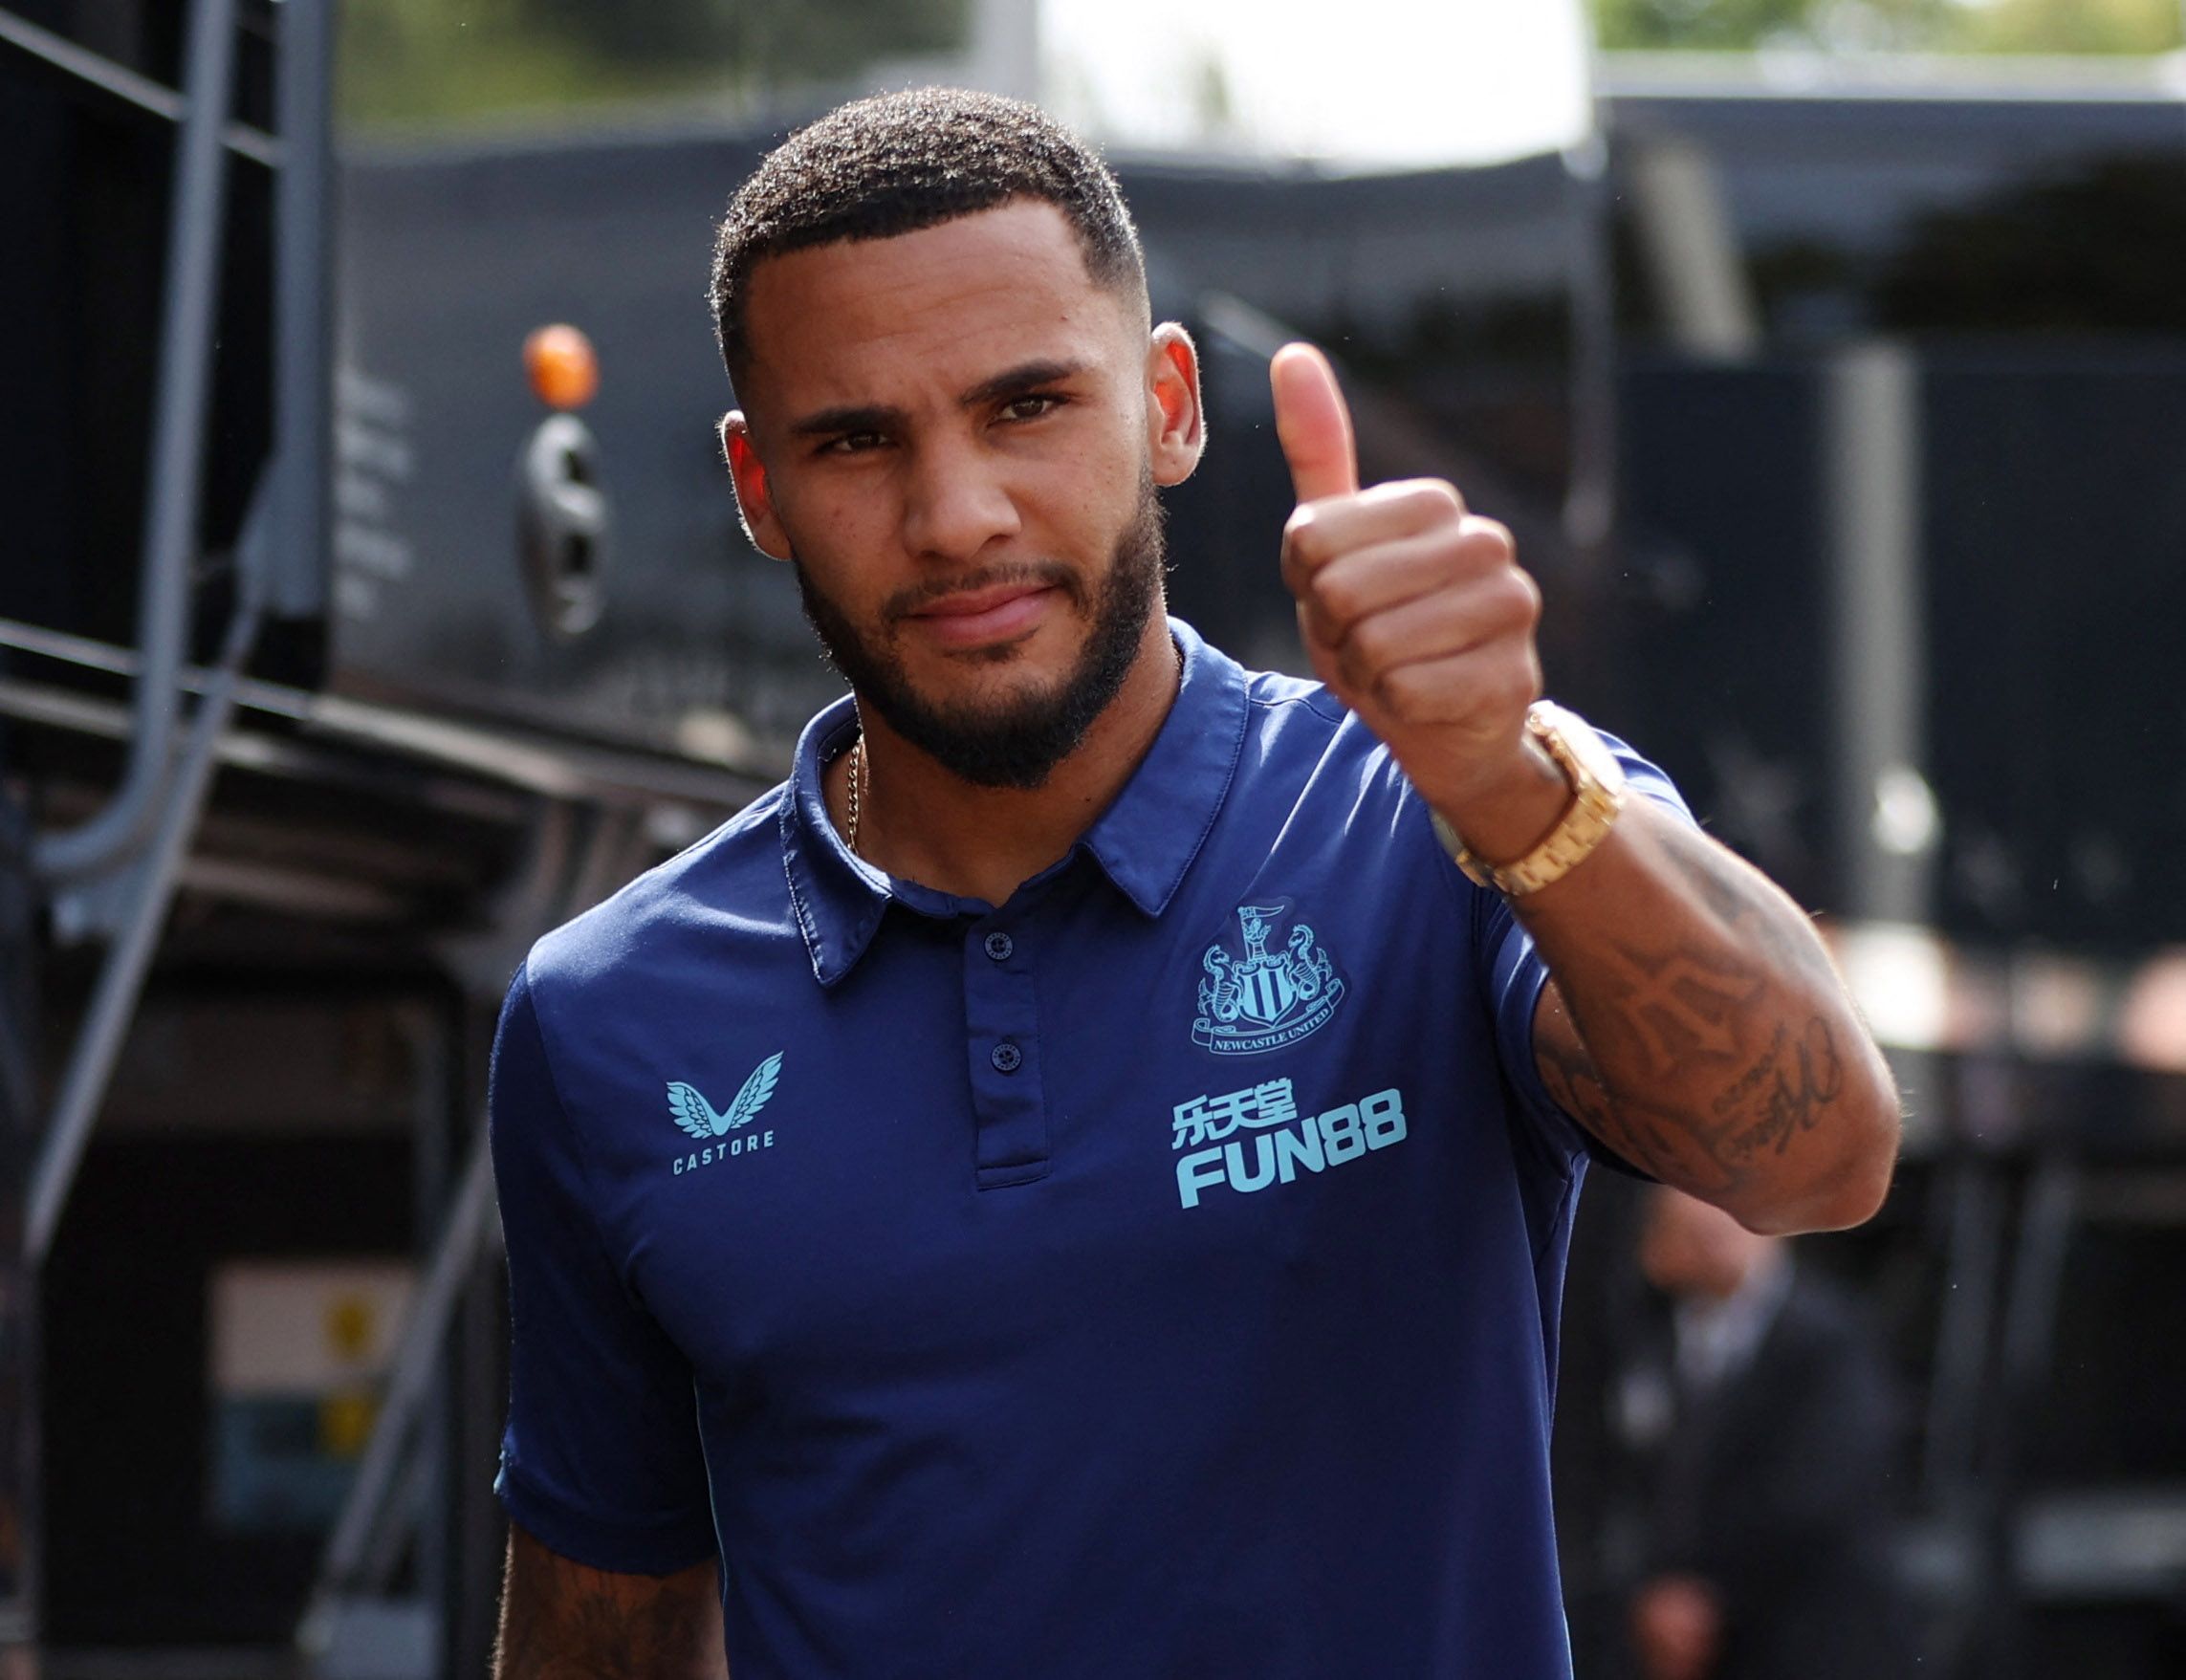 Soccer Football - Premier League - Wolverhampton Wanderers v Newcastle United - Molineux Stadium, Wolverhampton, Britain - August 28, 2022 Newcastle United's Jamaal Lascelles arrives for the match Action Images via Reuters/Molly Darlington EDITORIAL USE ONLY. No use with unauthorized audio, video, data, fixture lists, club/league logos or 'live' services. Online in-match use limited to 75 images, no video emulation. No use in betting, games or single club /league/player publications.  Please con